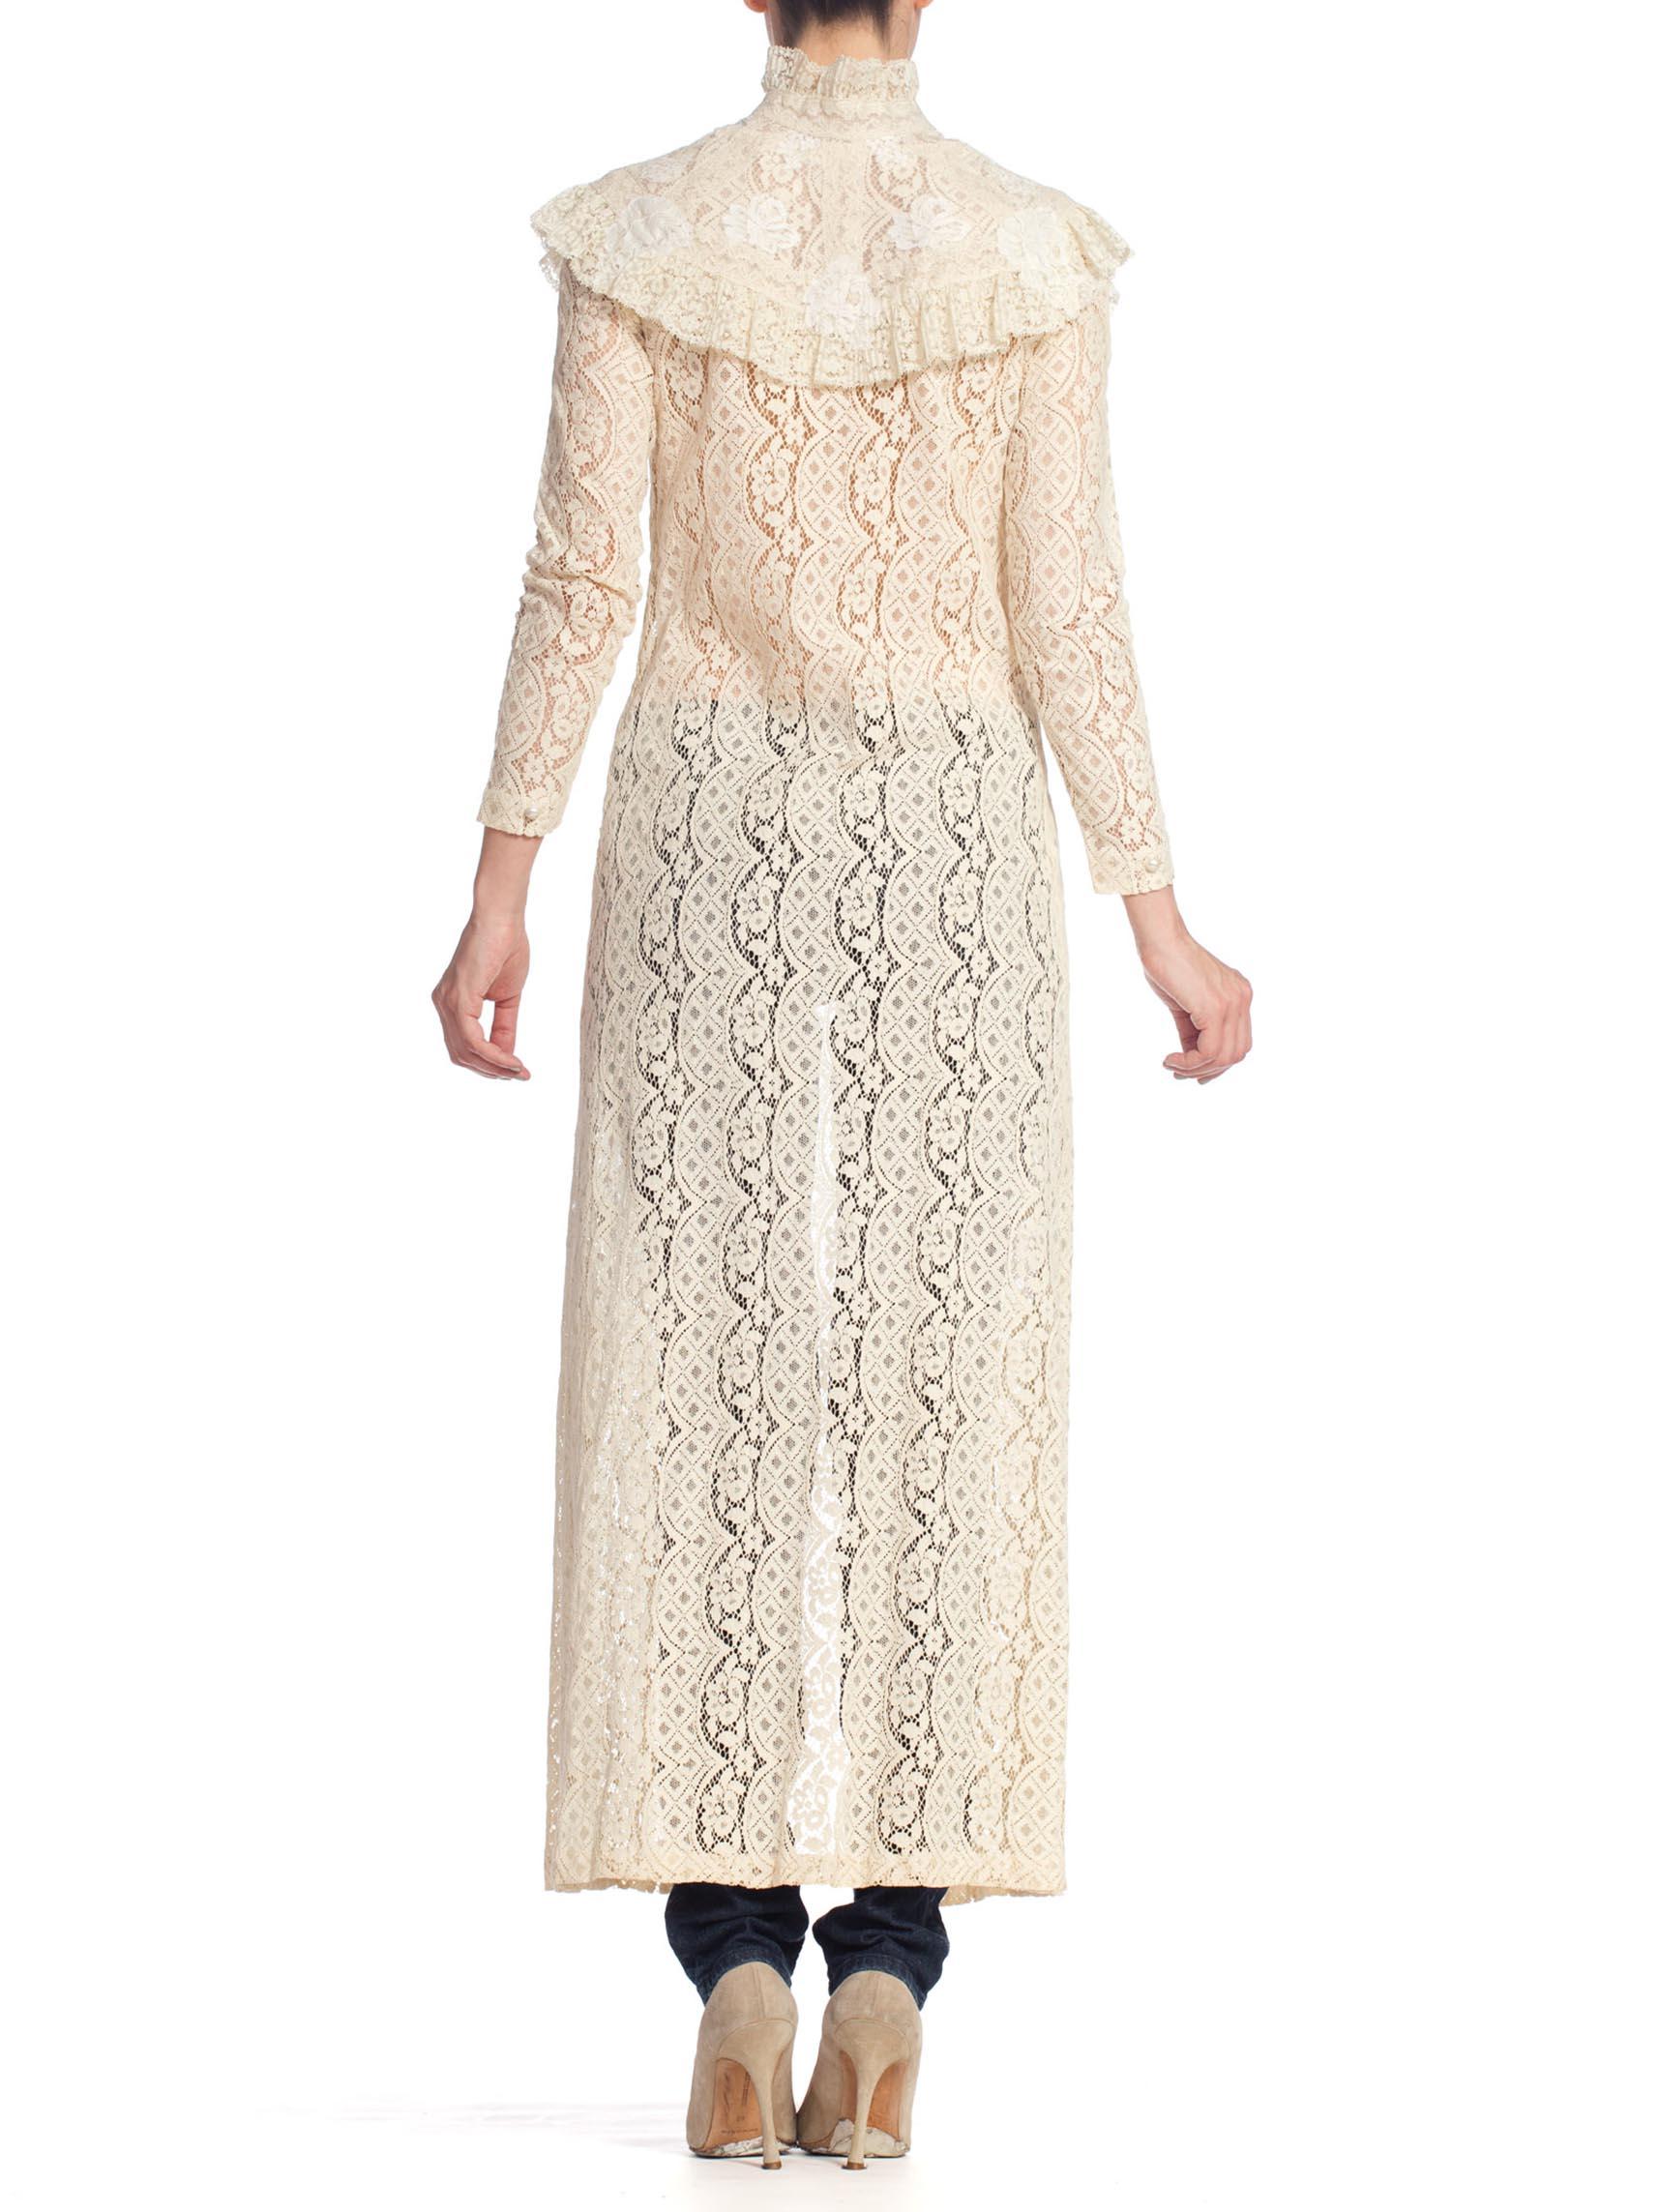 1970'S Ivory Cotton Lace Victorian Revival Duster Dress 1